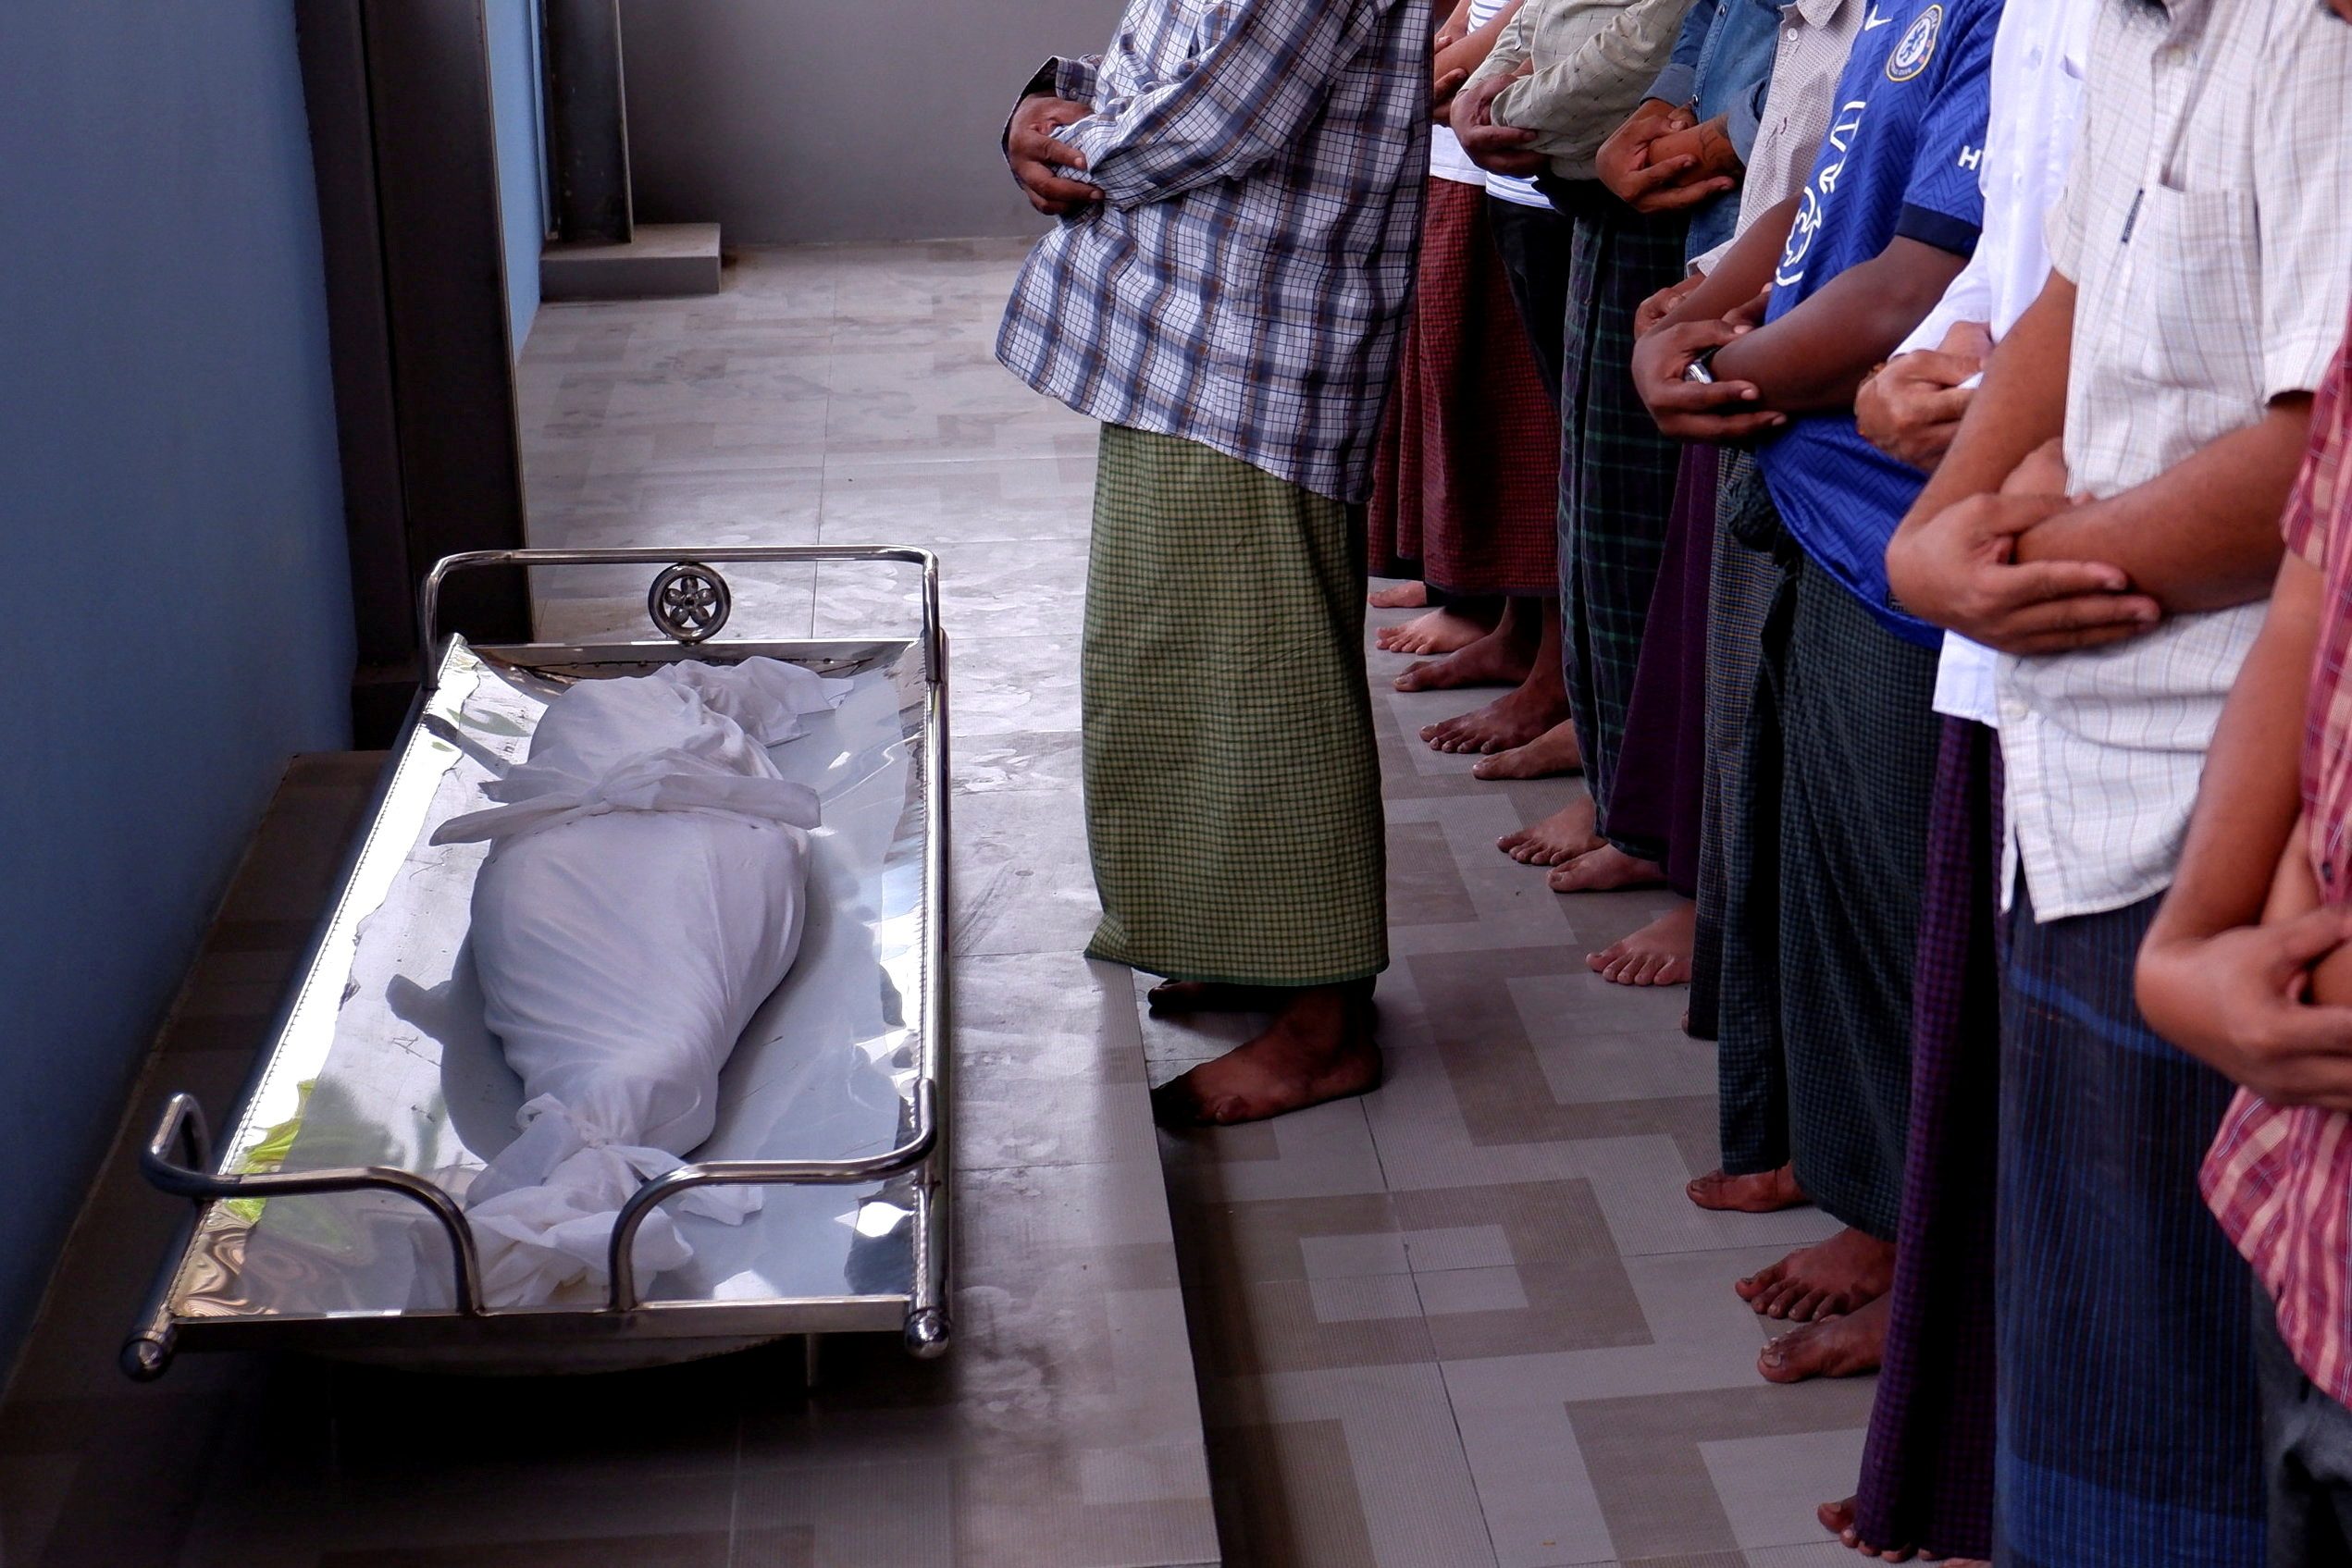 More than 300 people killed since Myanmar’s coup